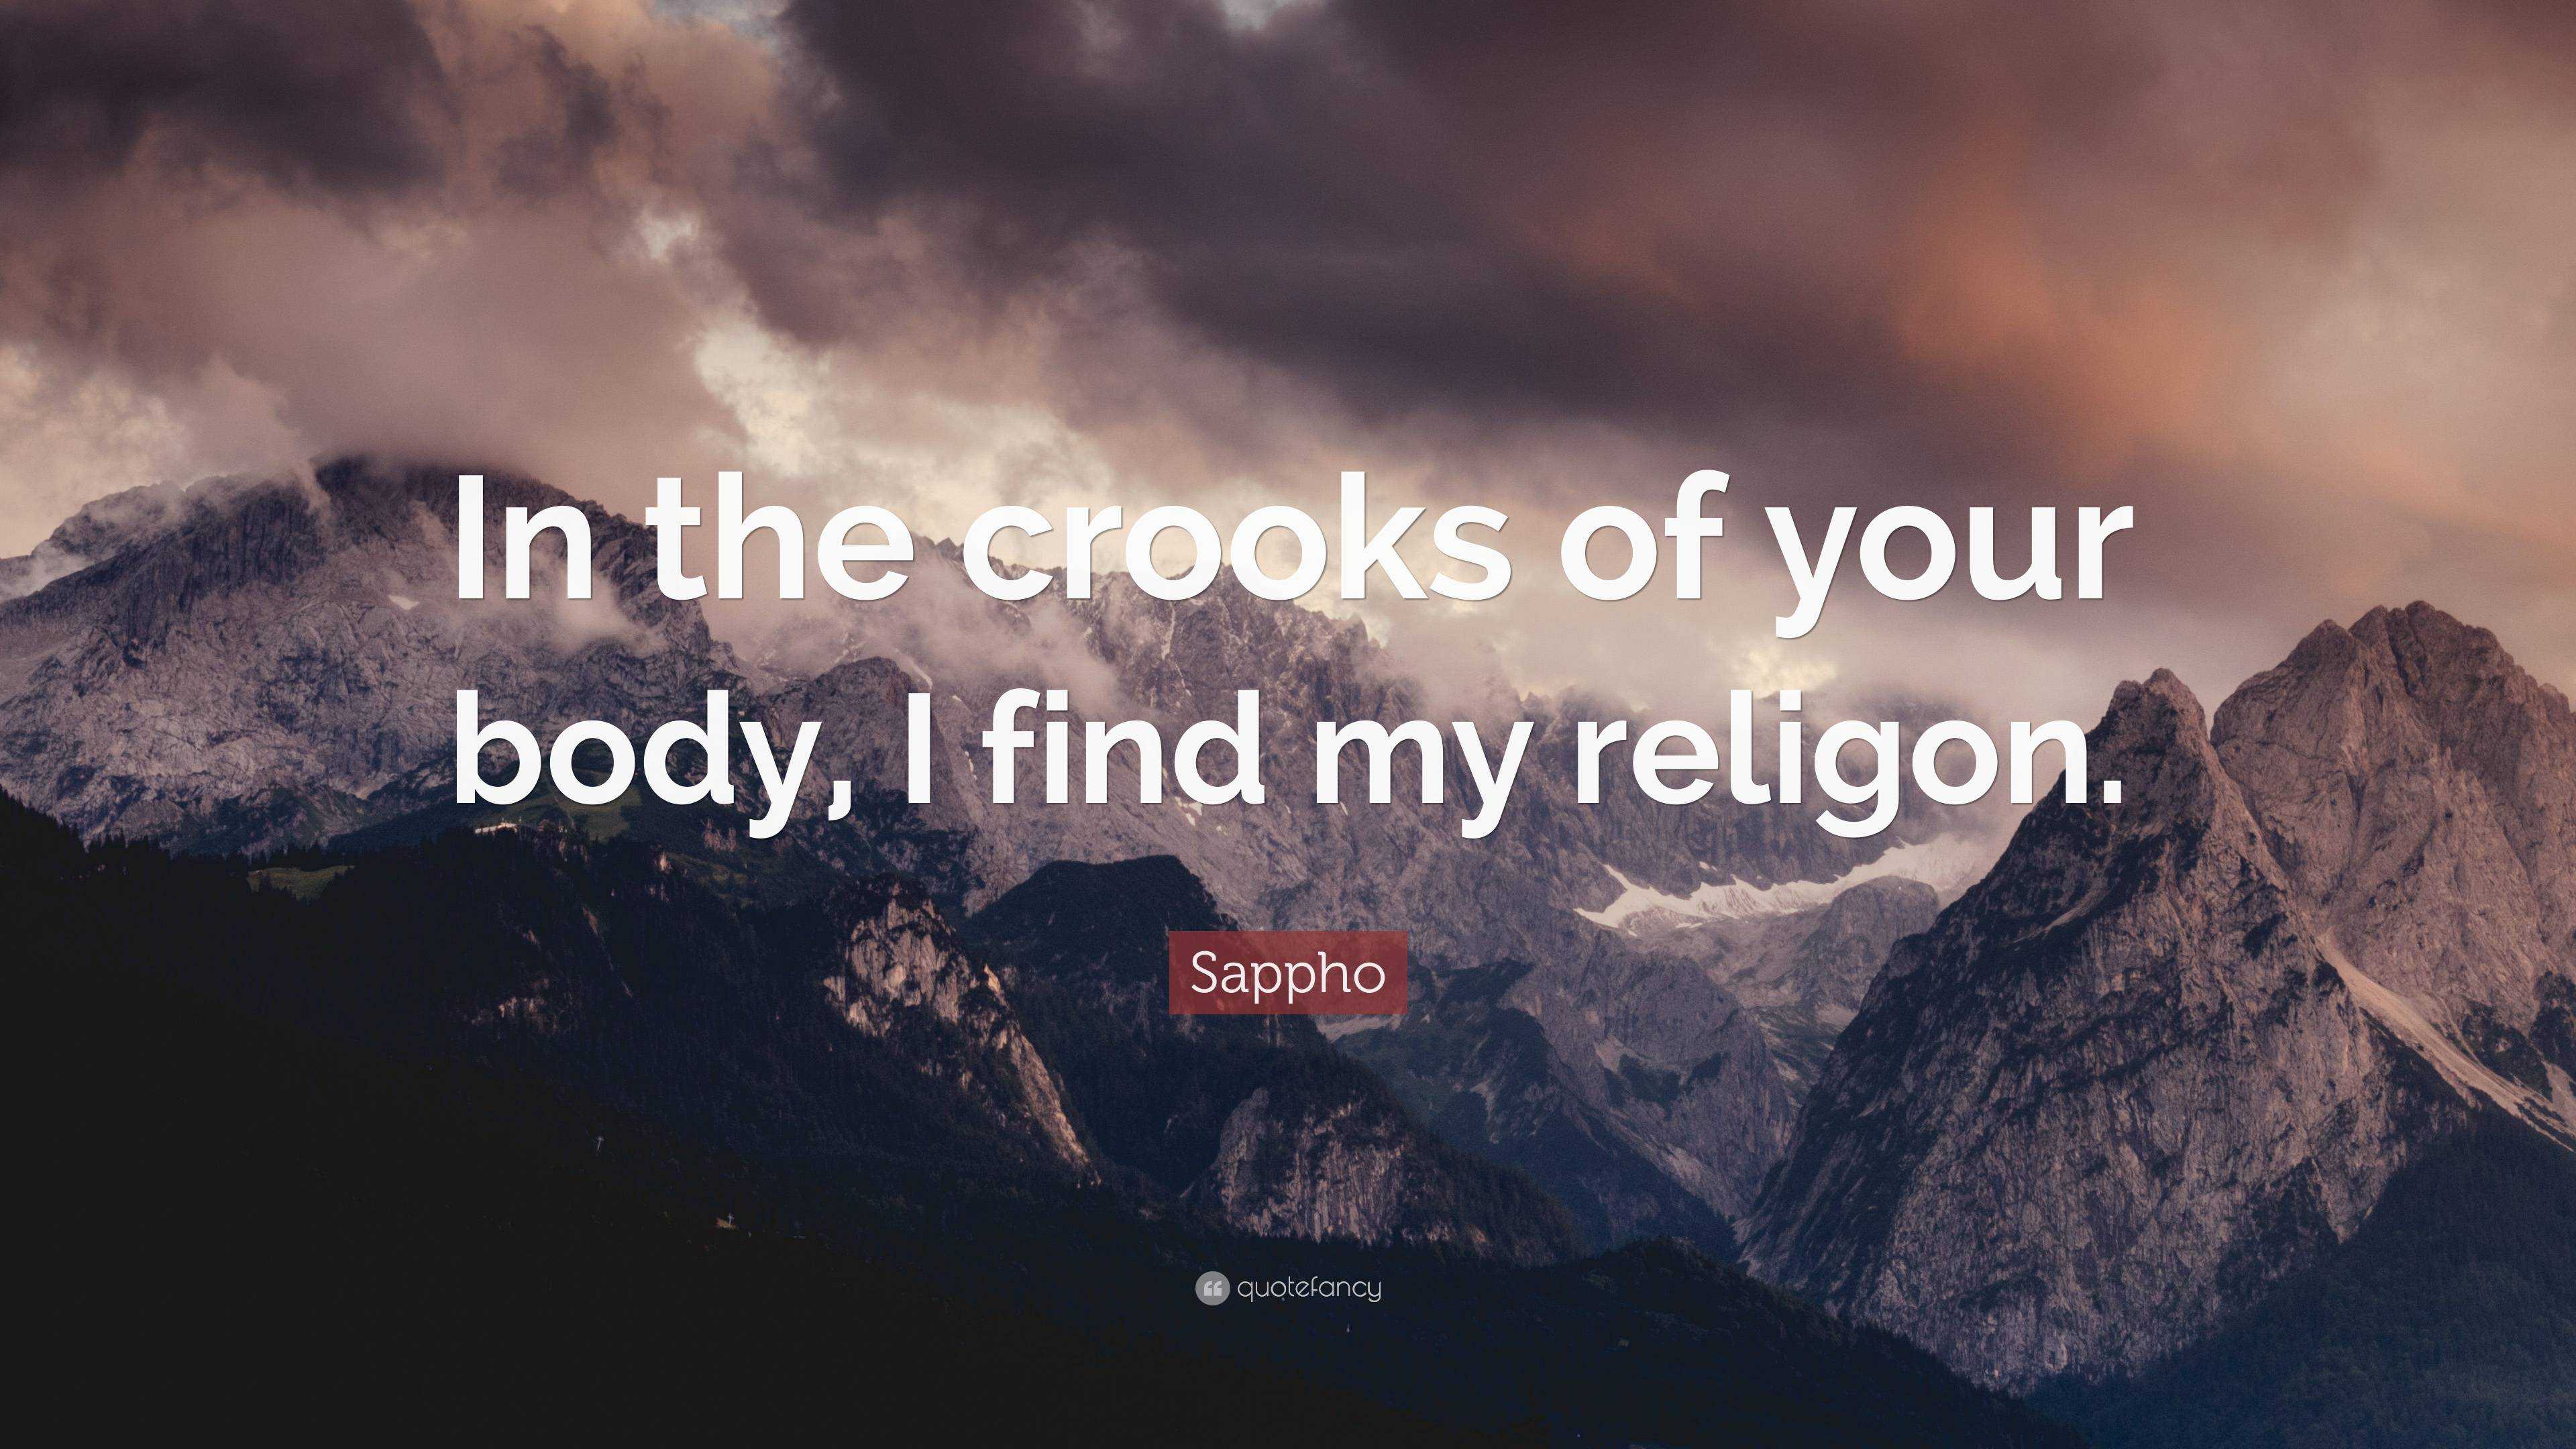 Sappho Quote “In the crooks of your body, I find my religon.”